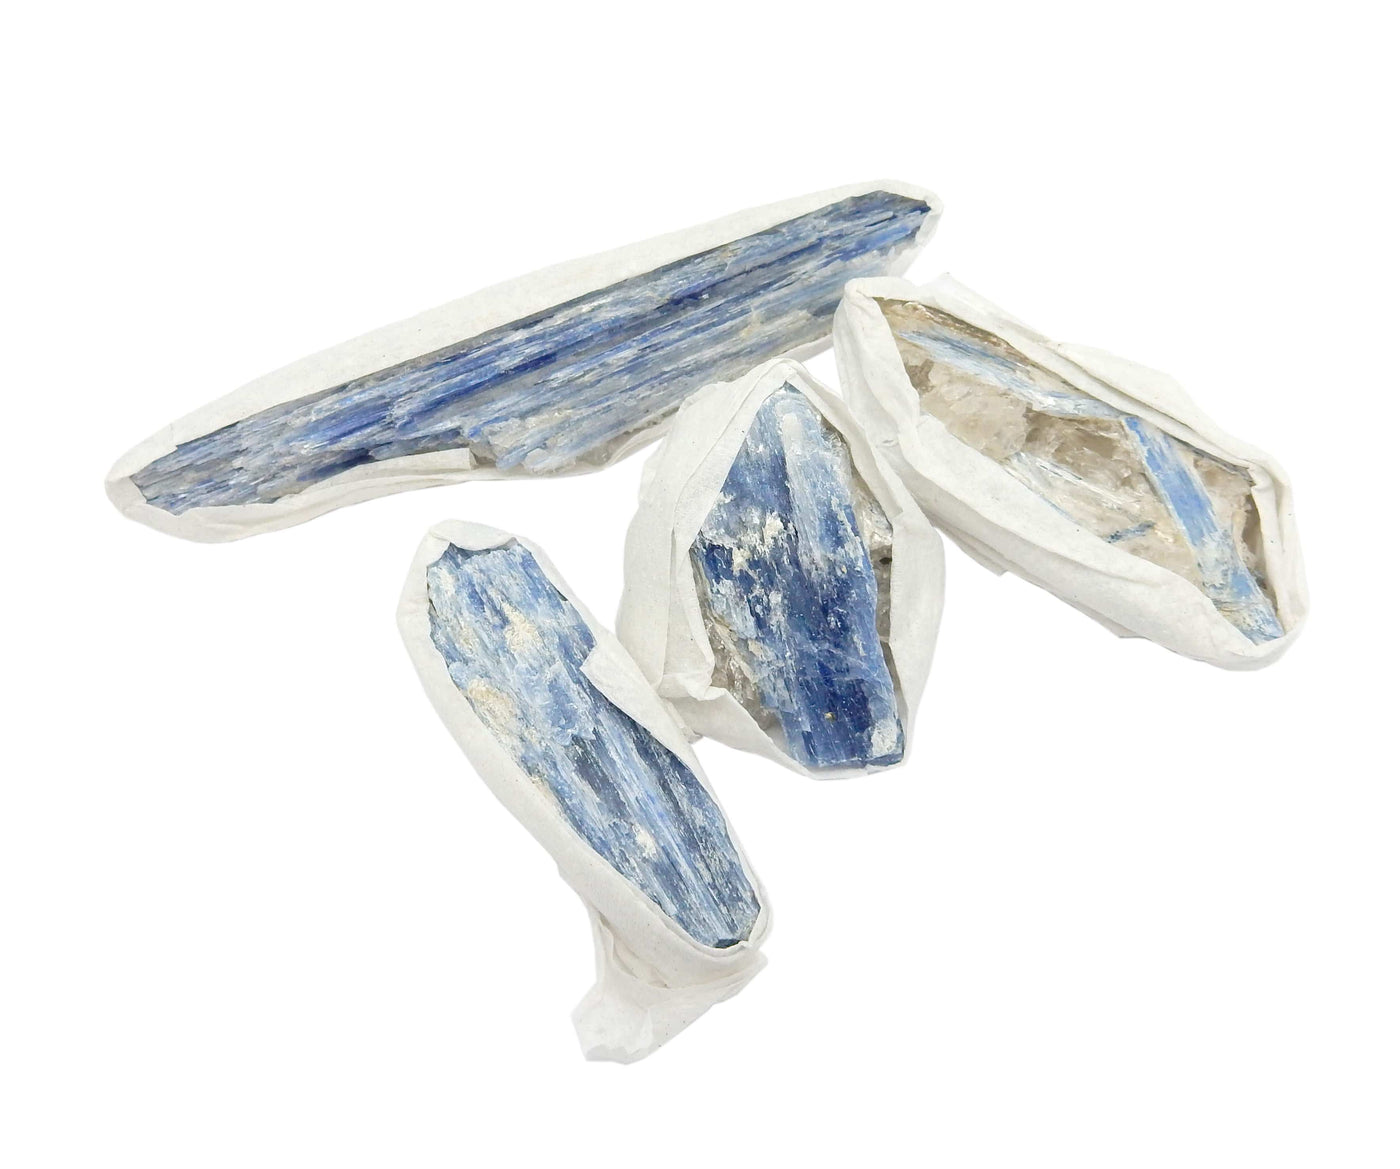 4 individual Blue Kyanite Blades displayed on a white surface, edges wrapped in tissue.